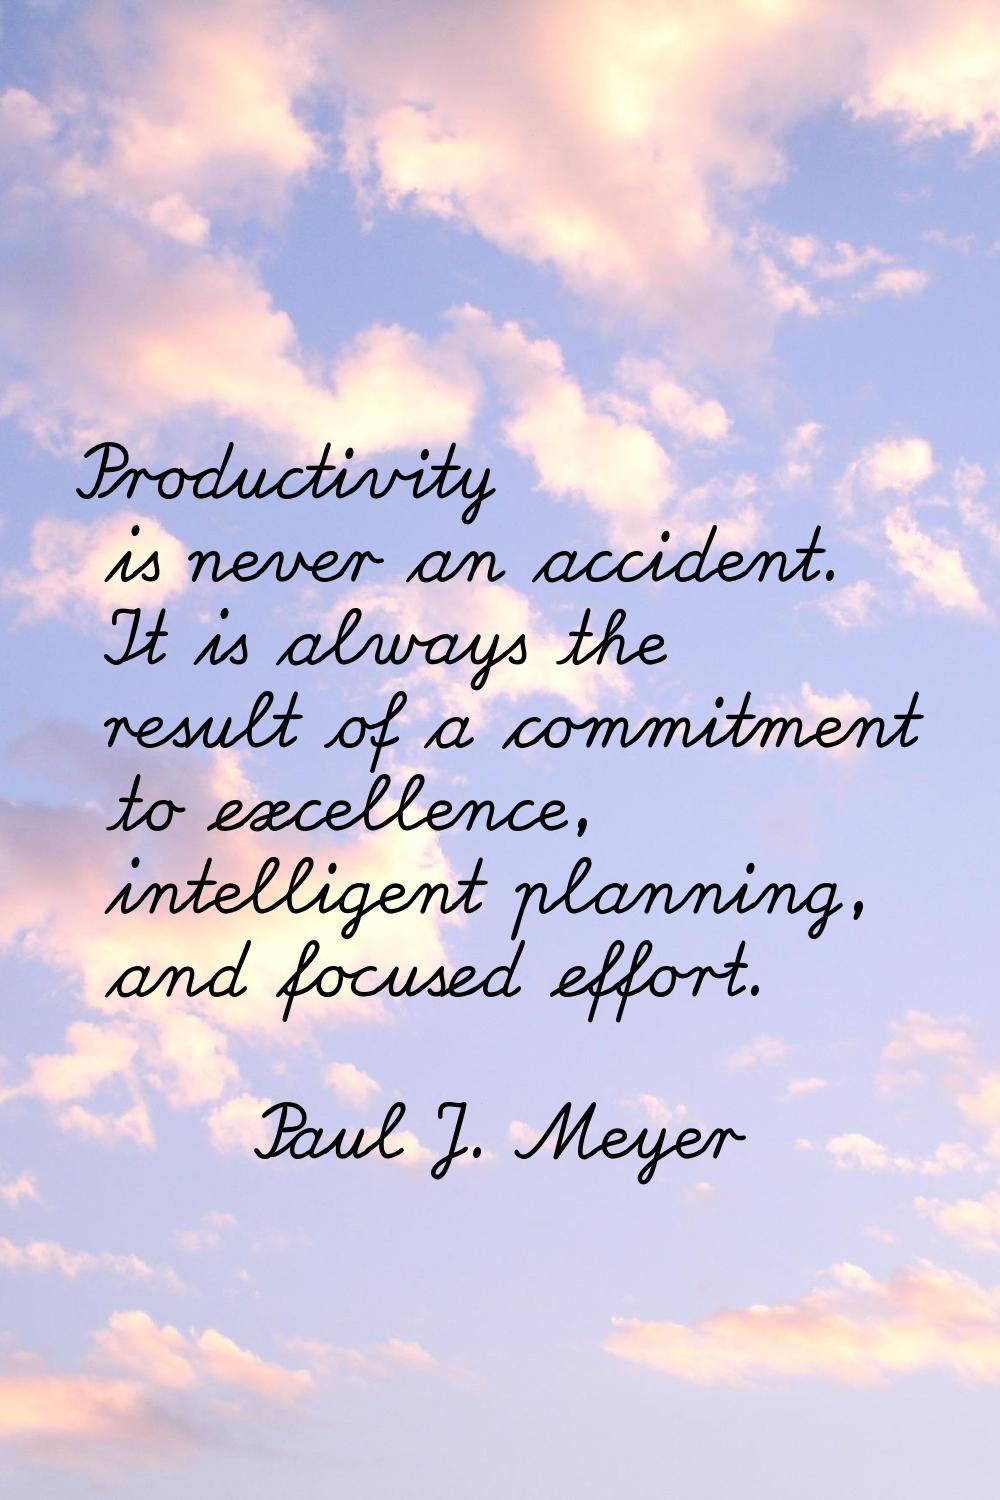 Productivity is never an accident. It is always the result of a commitment to excellence, intellige